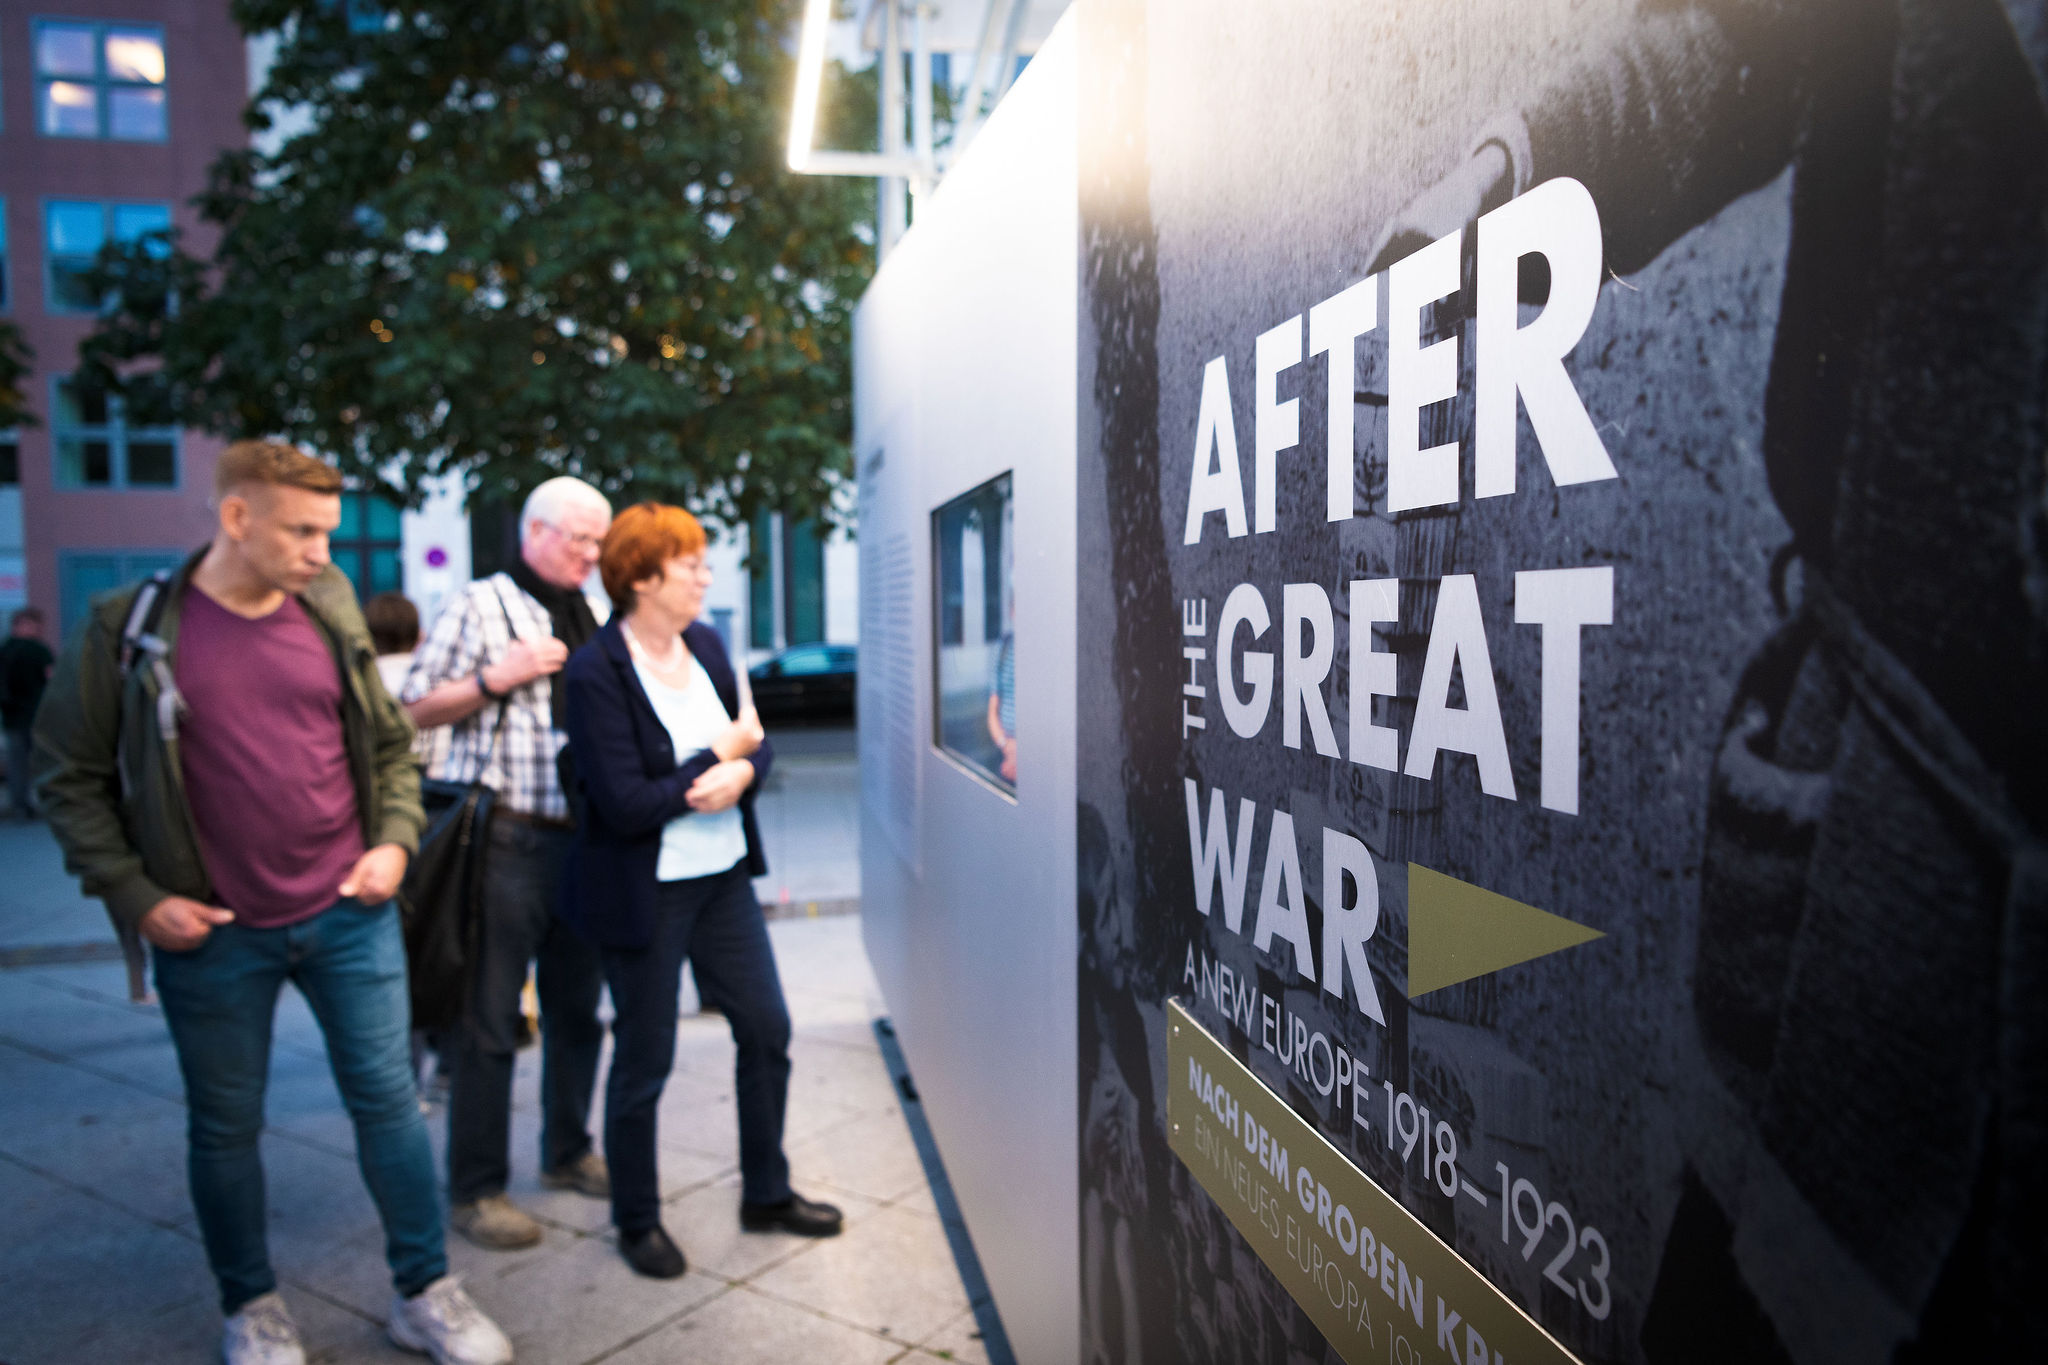 After the Great War display coming to Weimar